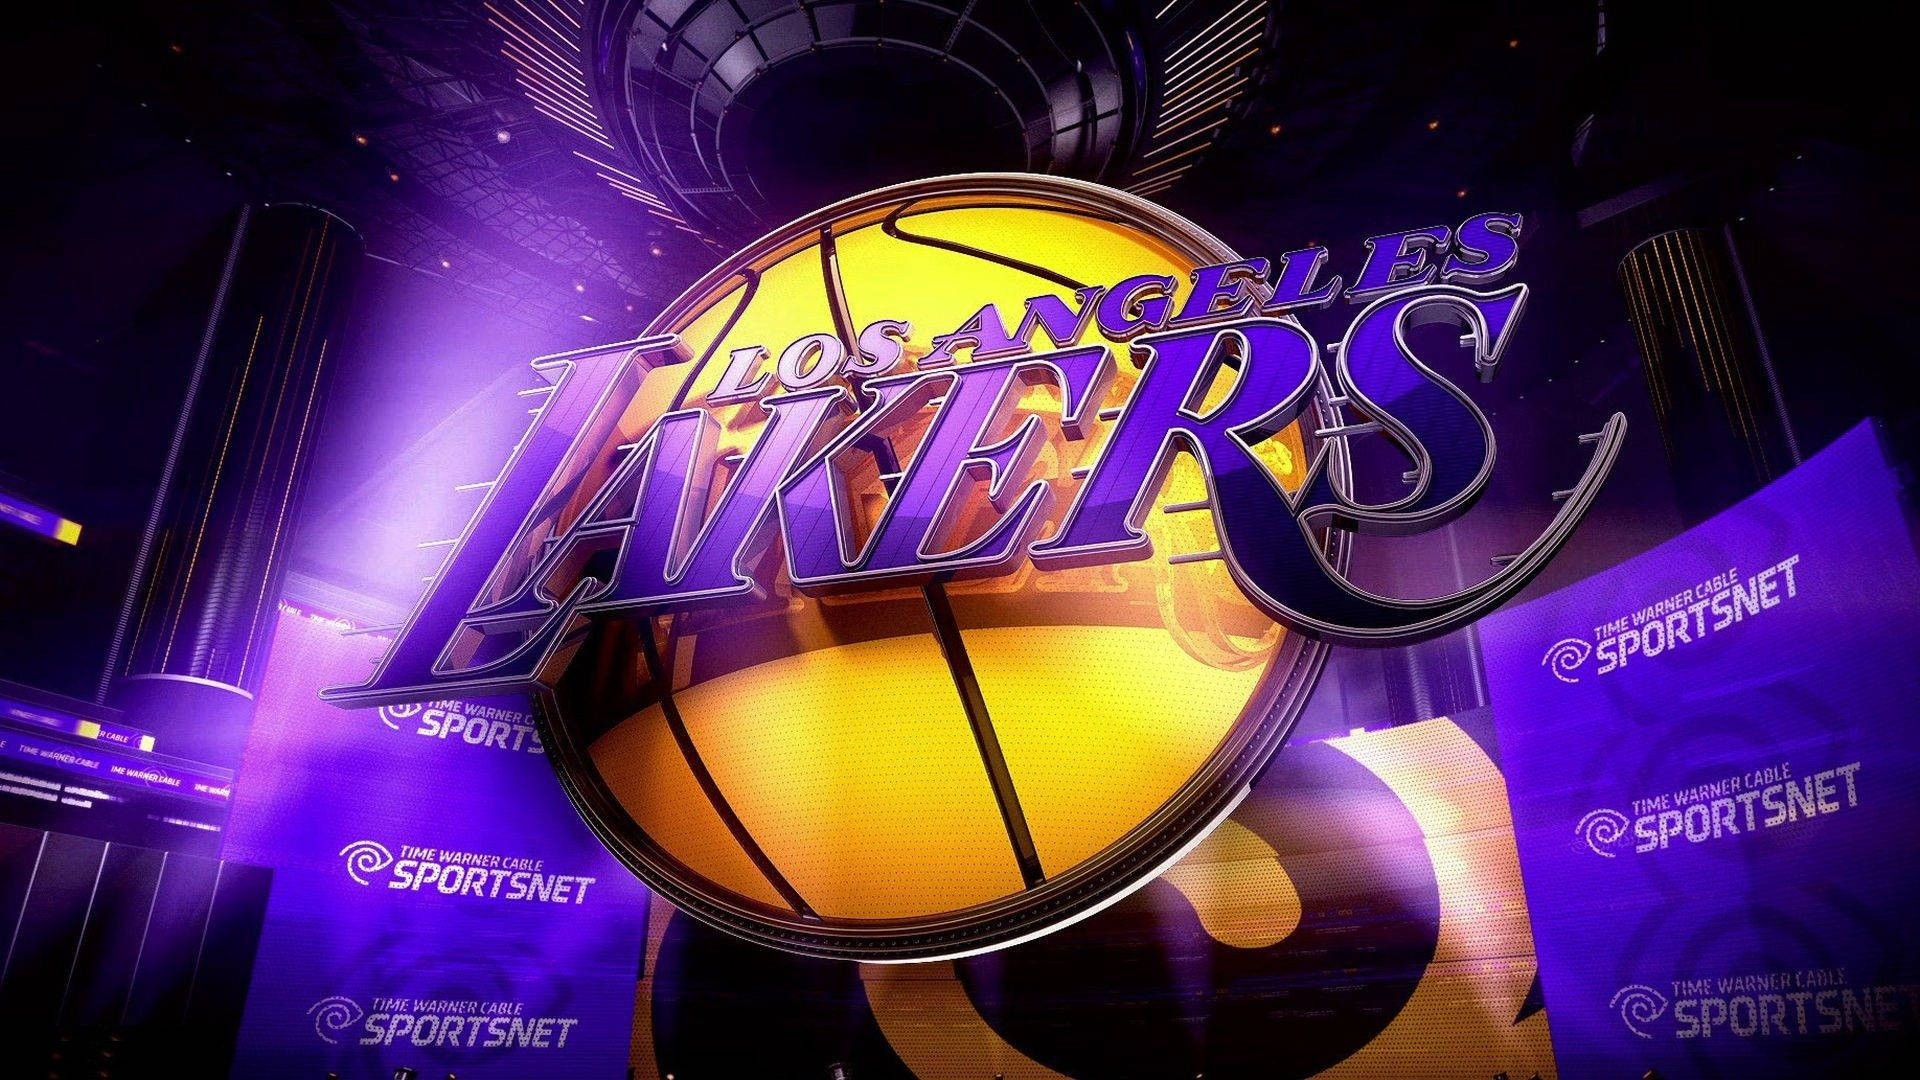 Wallpapers, Los Angeles Lakers